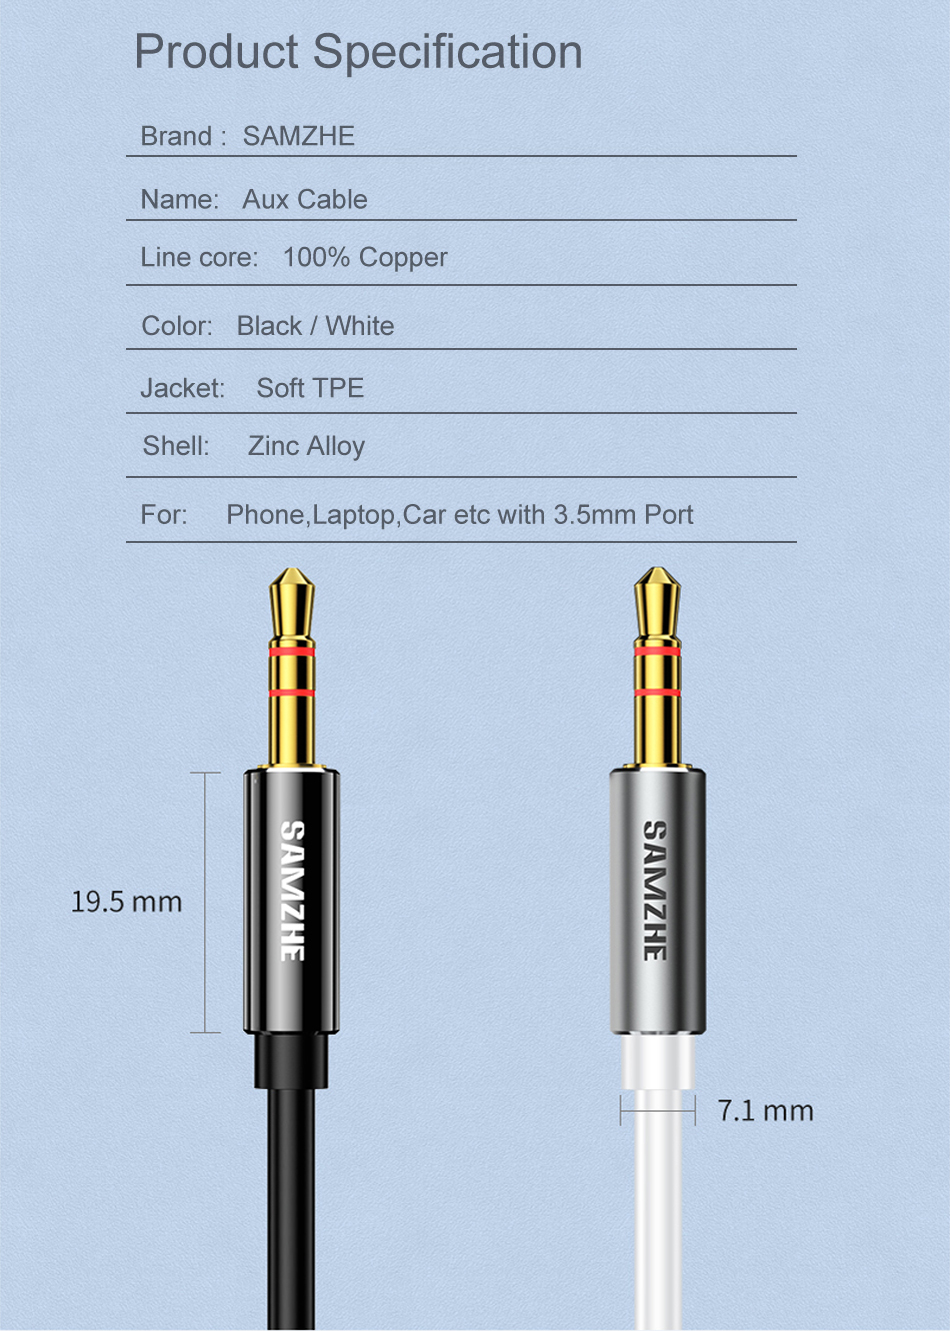 SAMZHE AUX Cable 3.5mm Audio Cable 3.5 mm Jack Speaker Cable for Headphone Laptop Music Player Phone